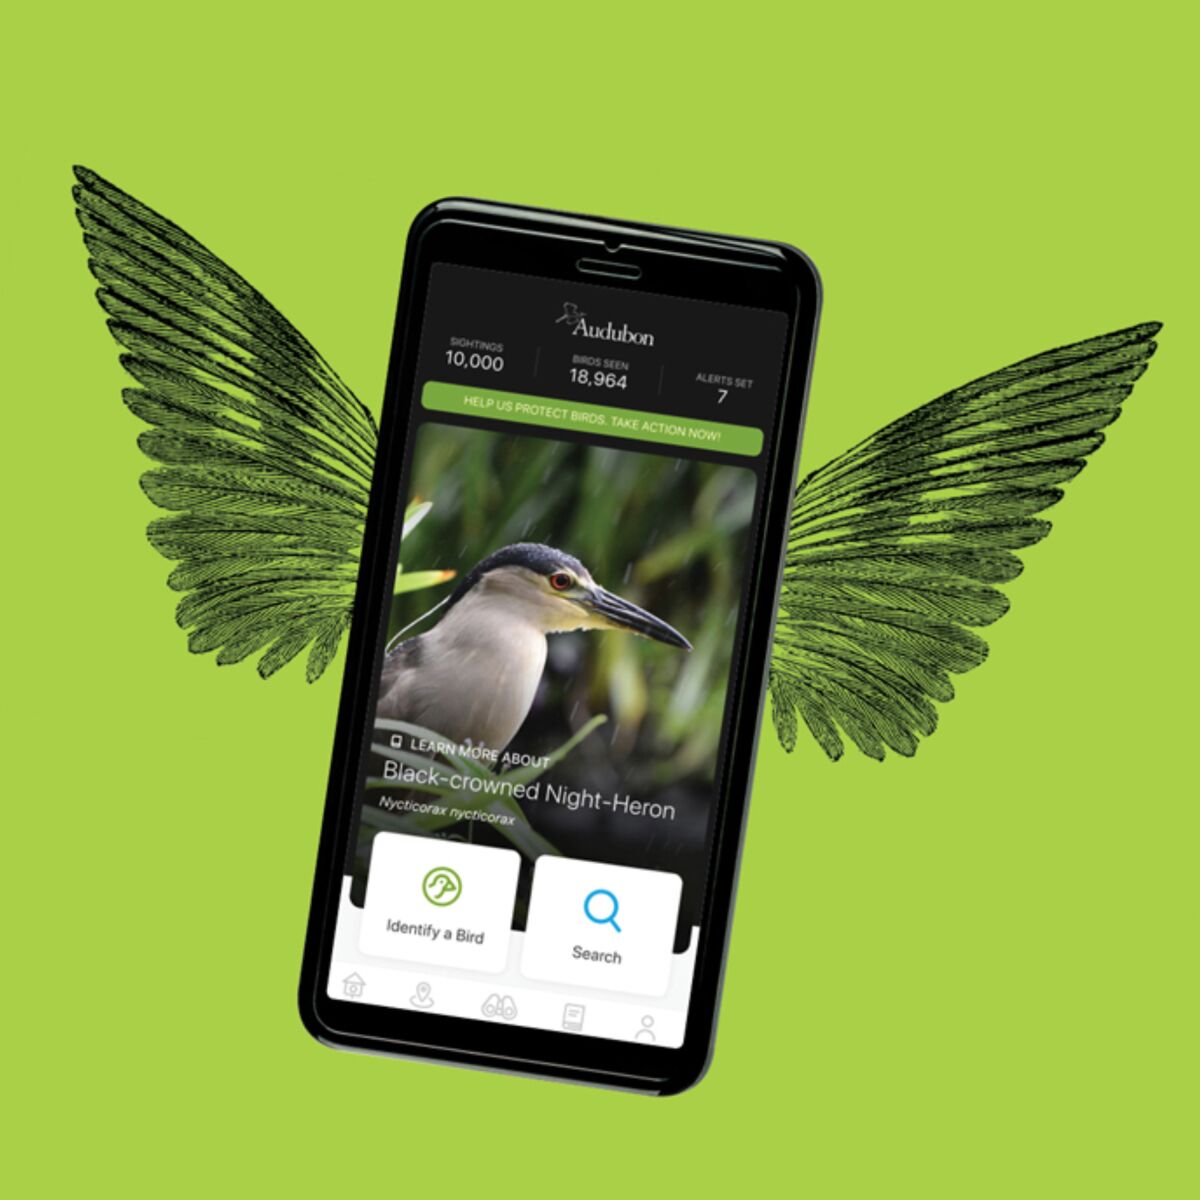 An illustration of wings with a photo of a cellphone